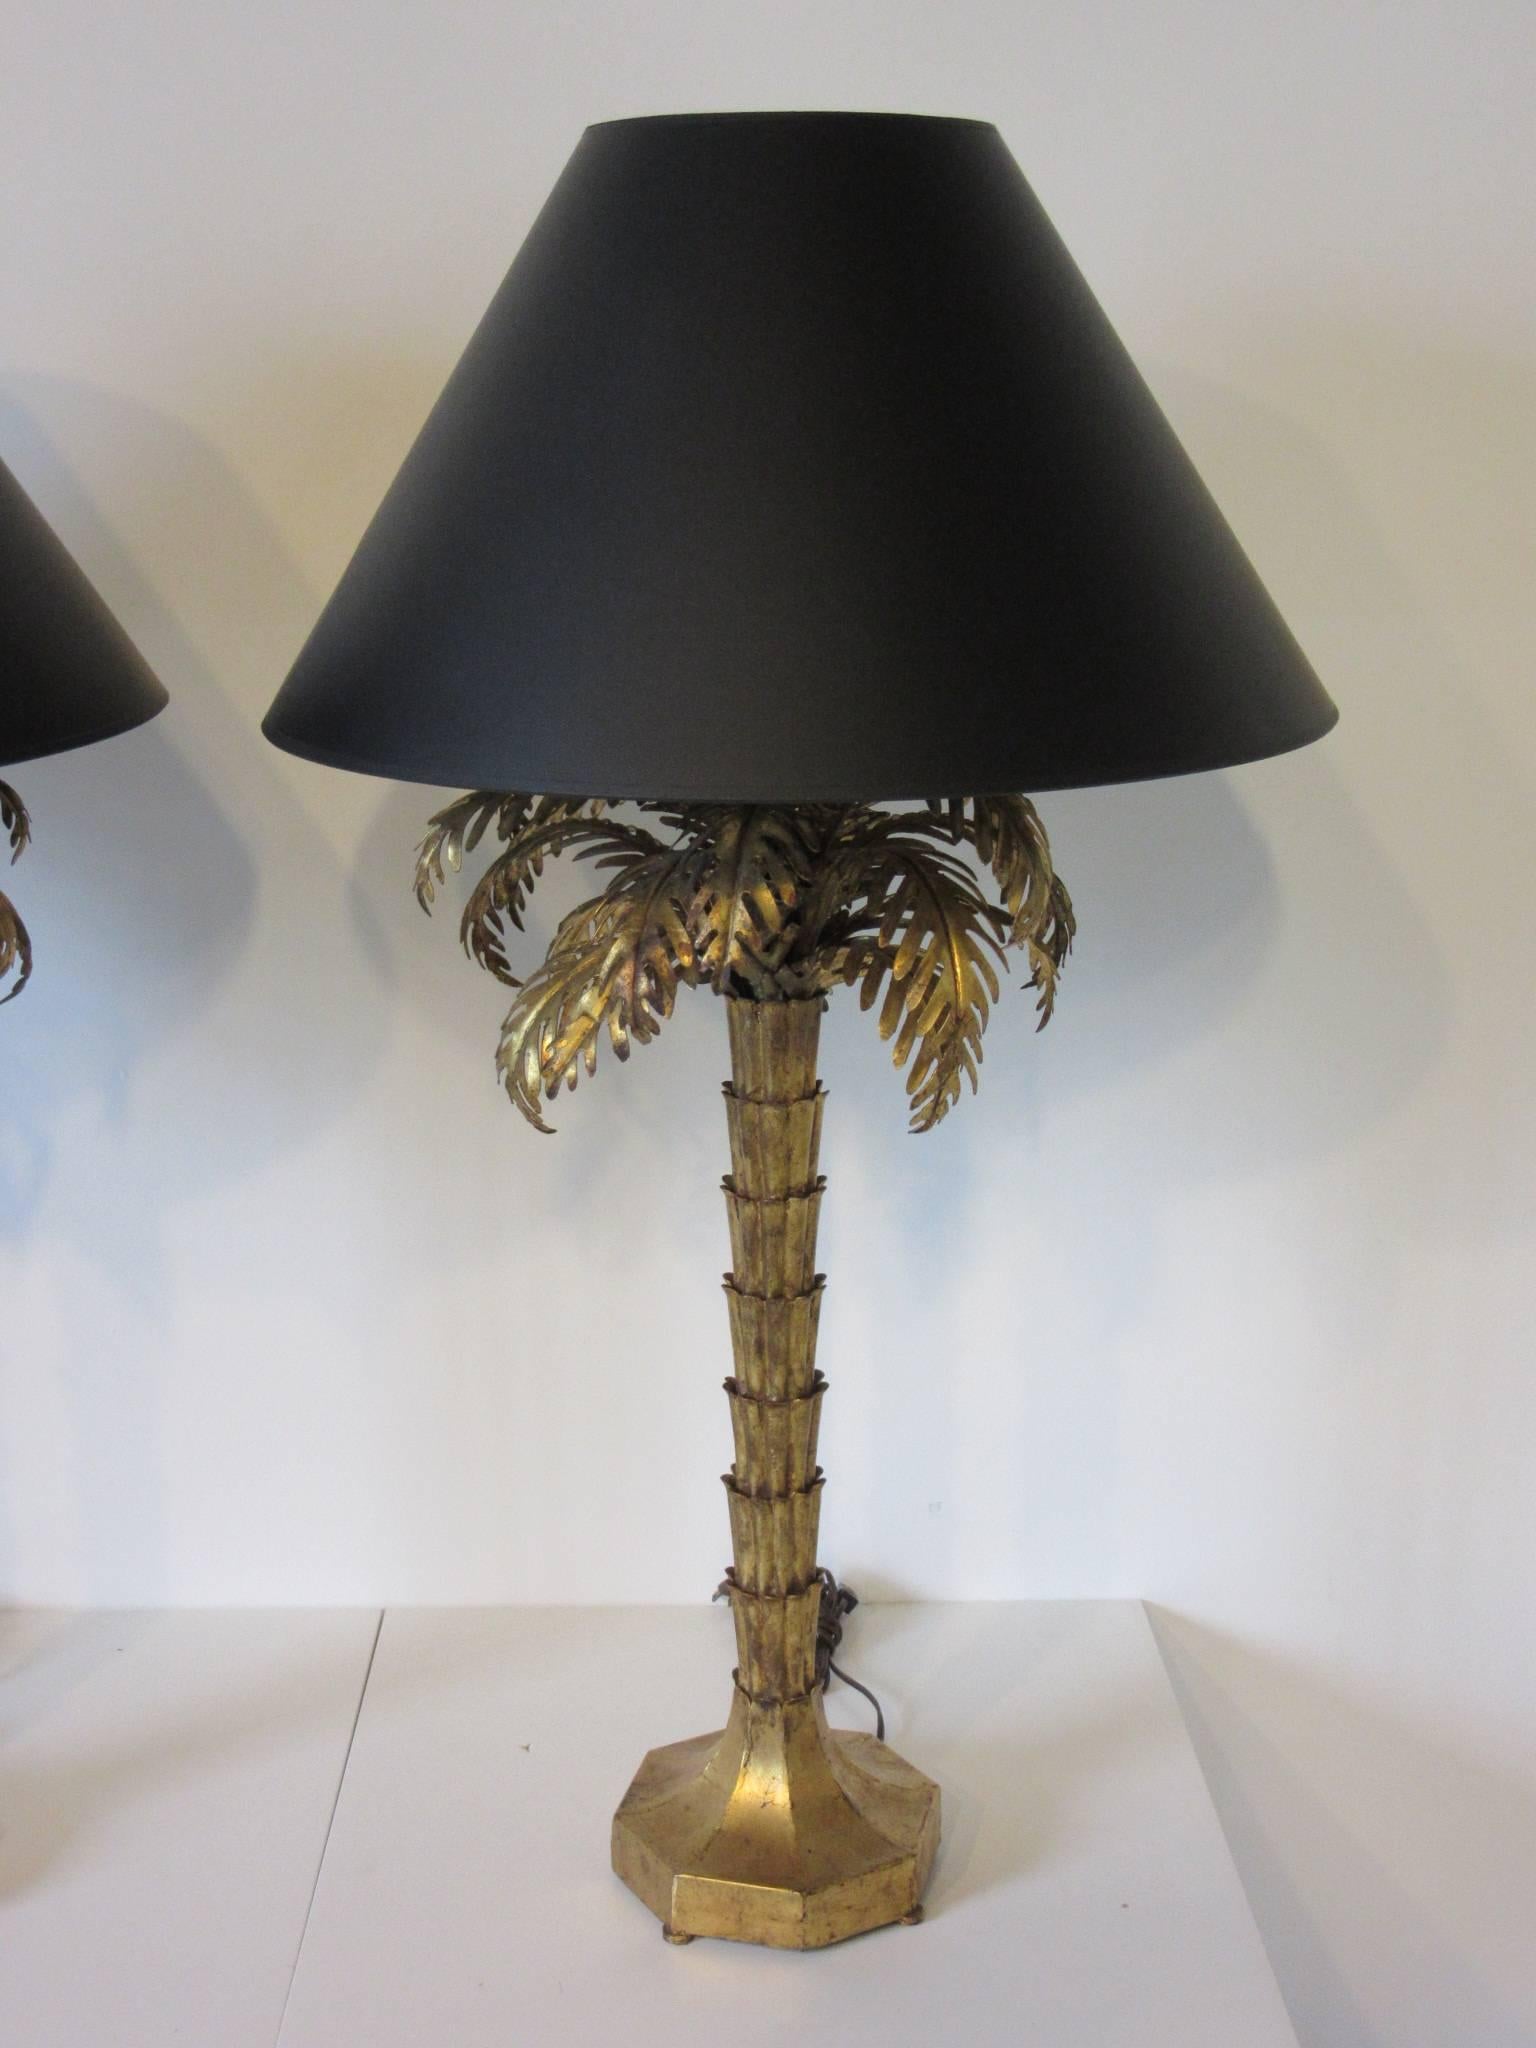 A pair of gold gilt metal Tole palm tree table lamps with detailed leaves and trunks , black satin shades with gold toned molt interiors . Designed in the manner of Maison Jansen and Hollywood Regency. Measurement of the bottom of the shades base is